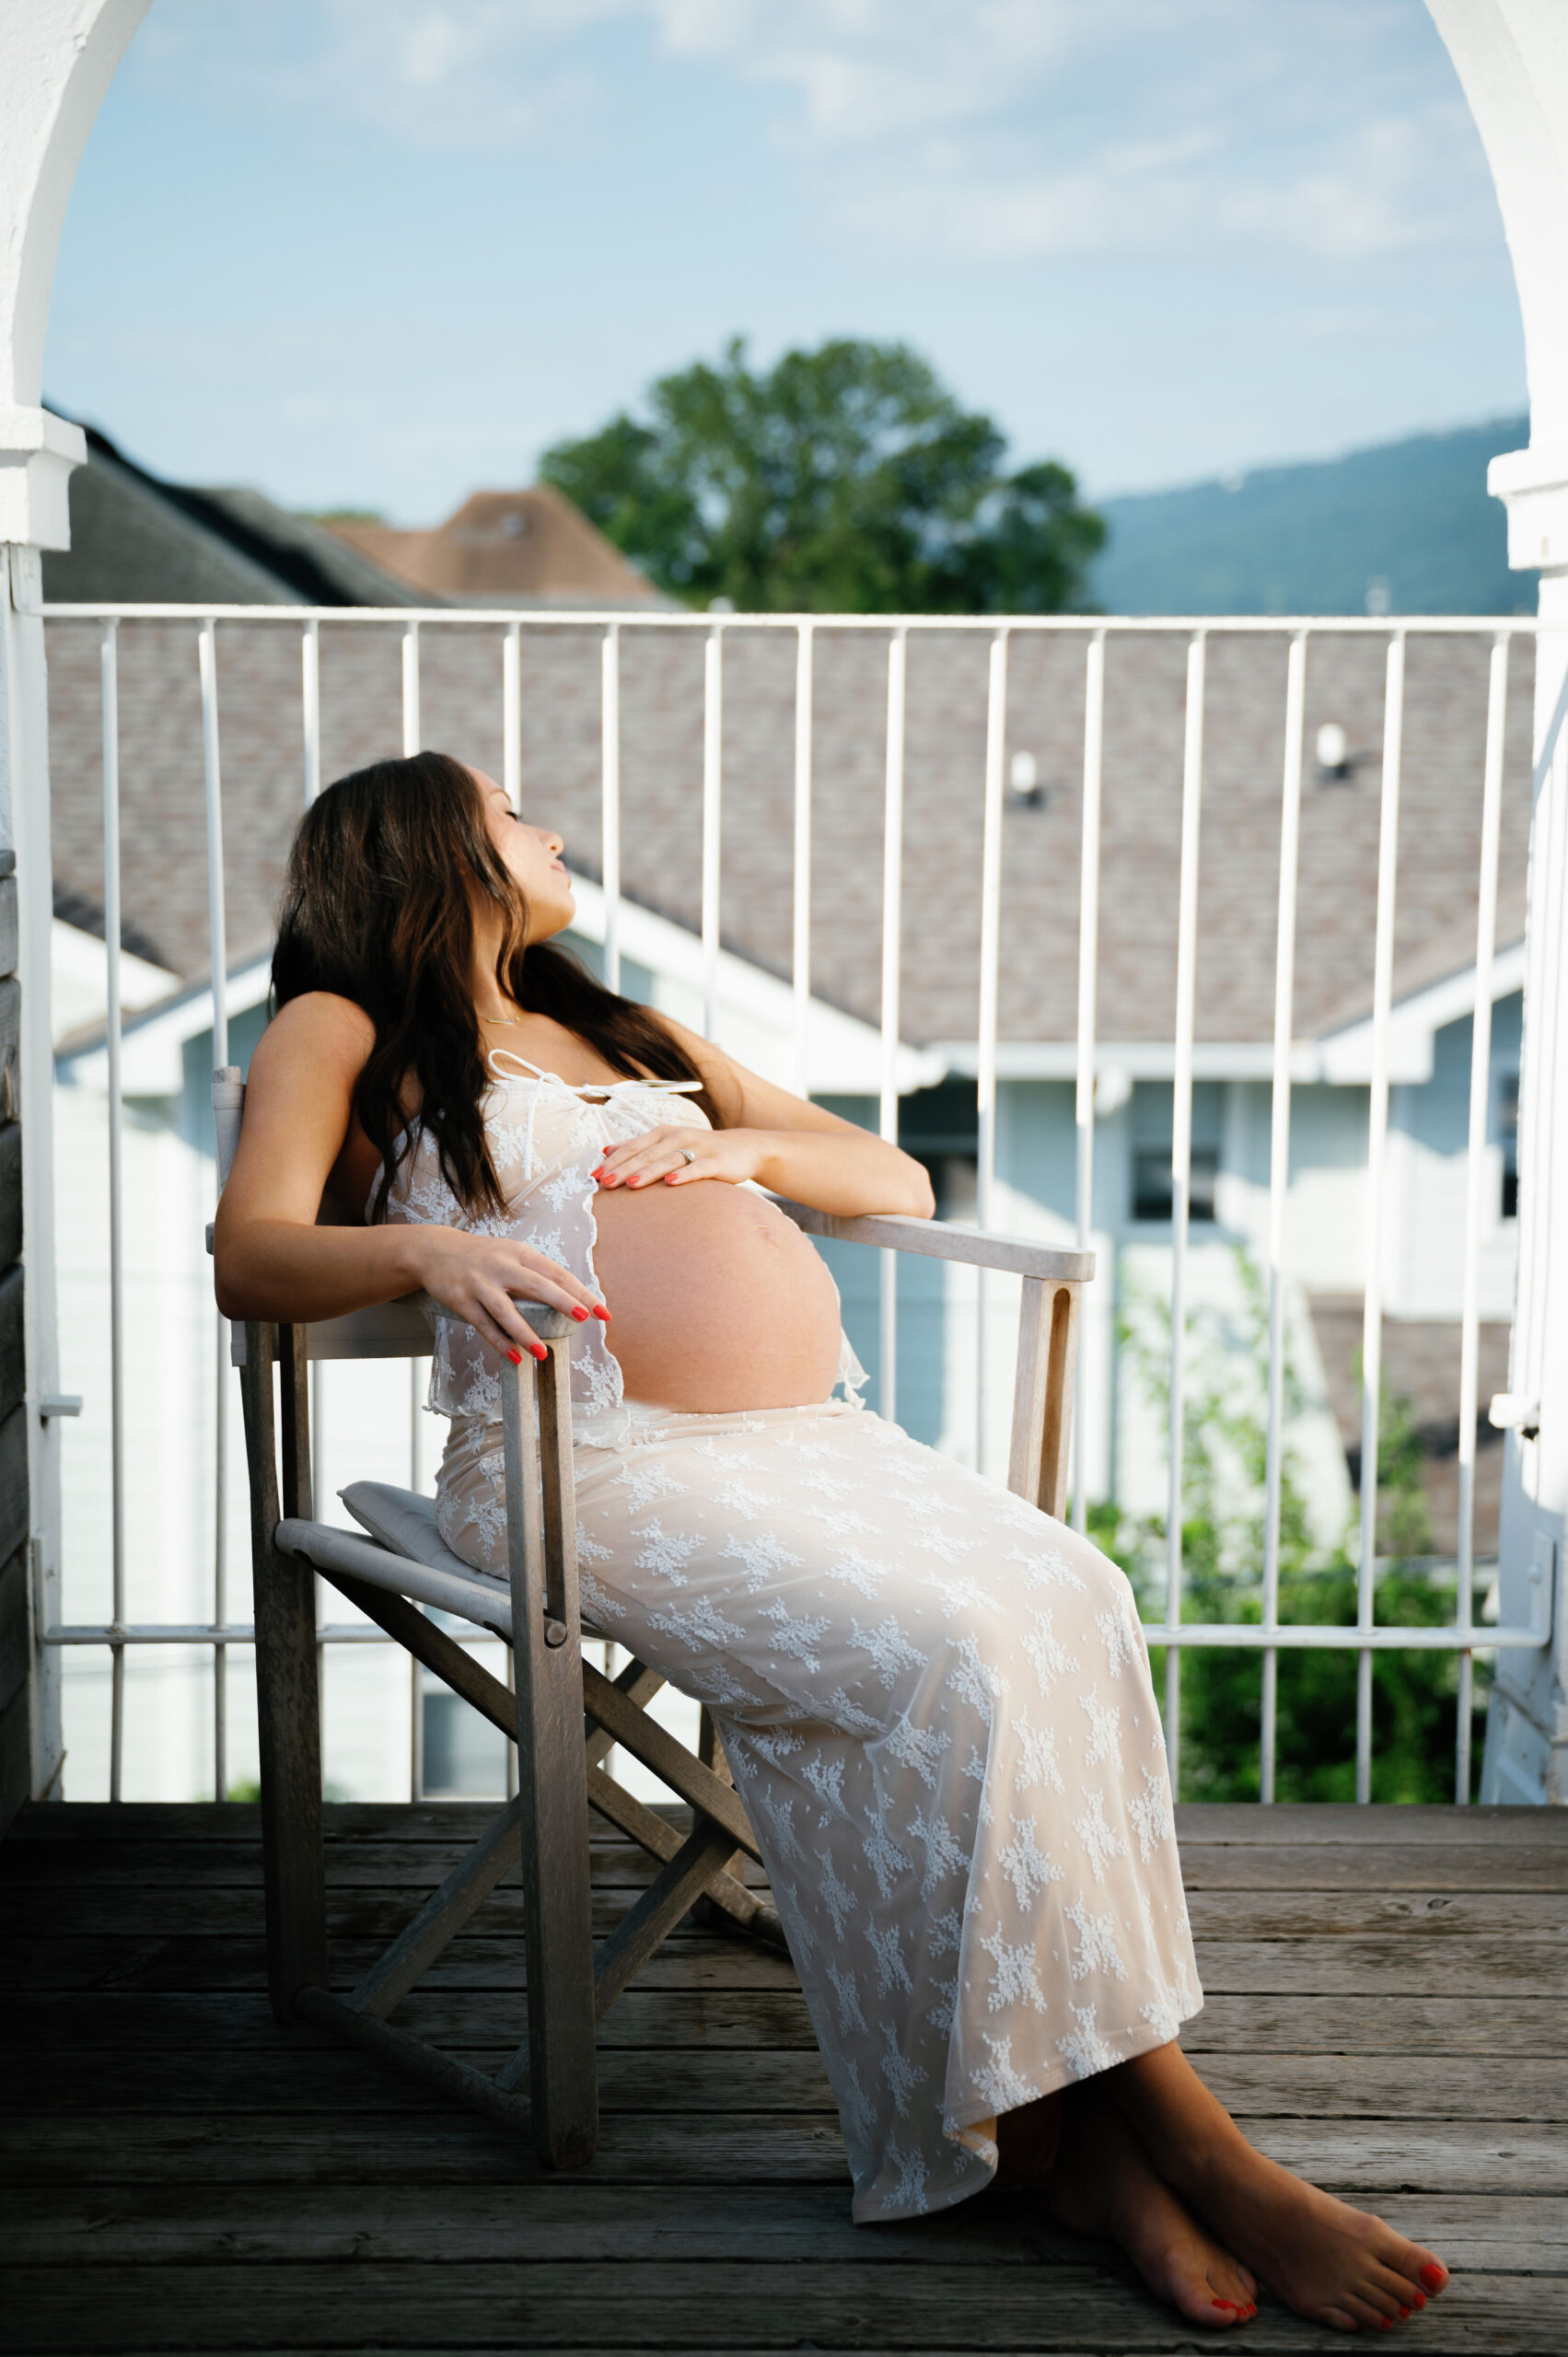 An Italian inspired maternity photoshoot planned by Chattanooga, TN maternity photographer Tags Photography.